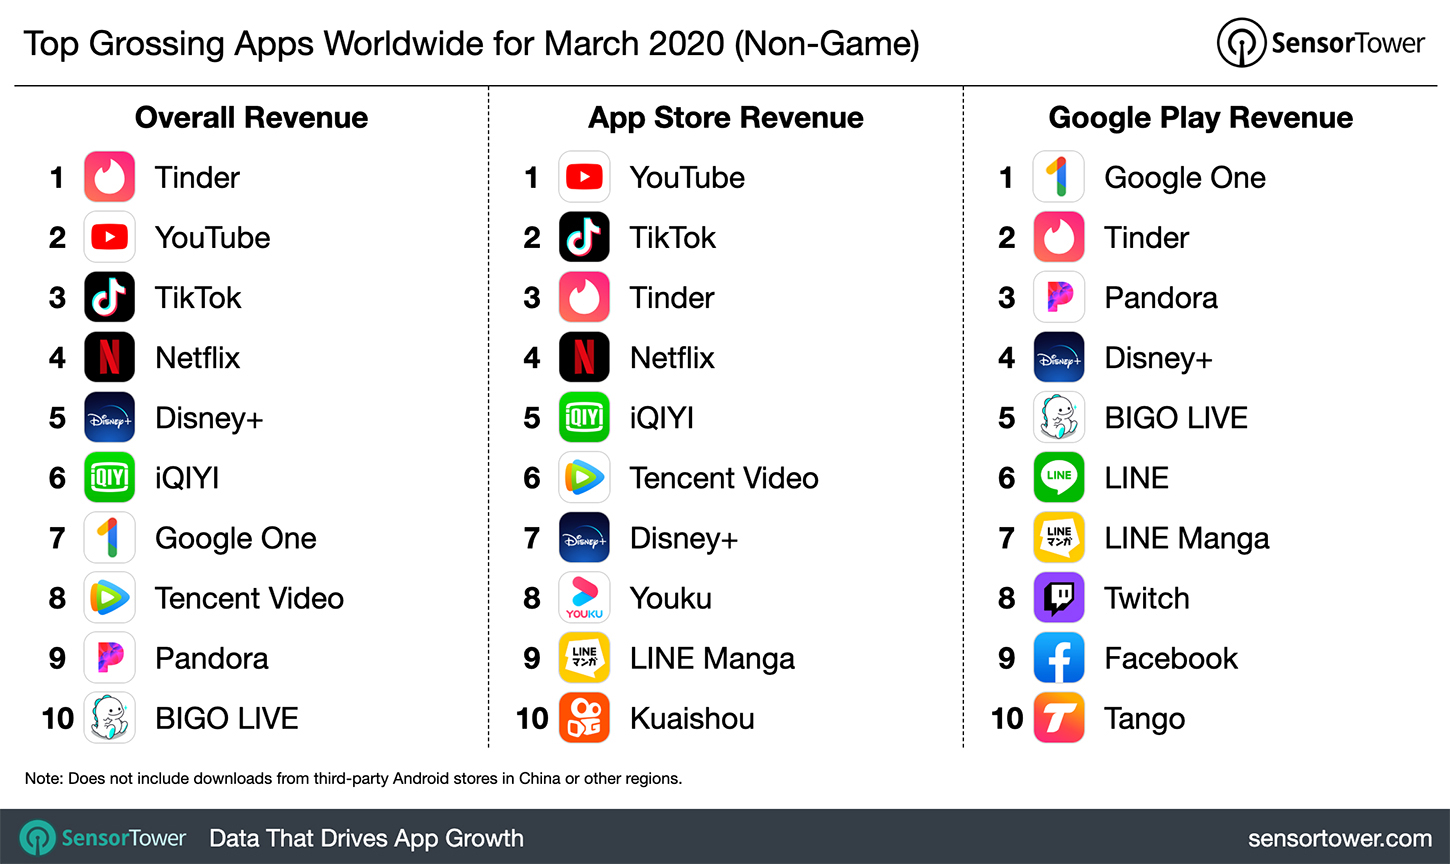 Top Grossing Apps Worldwide for March 2020